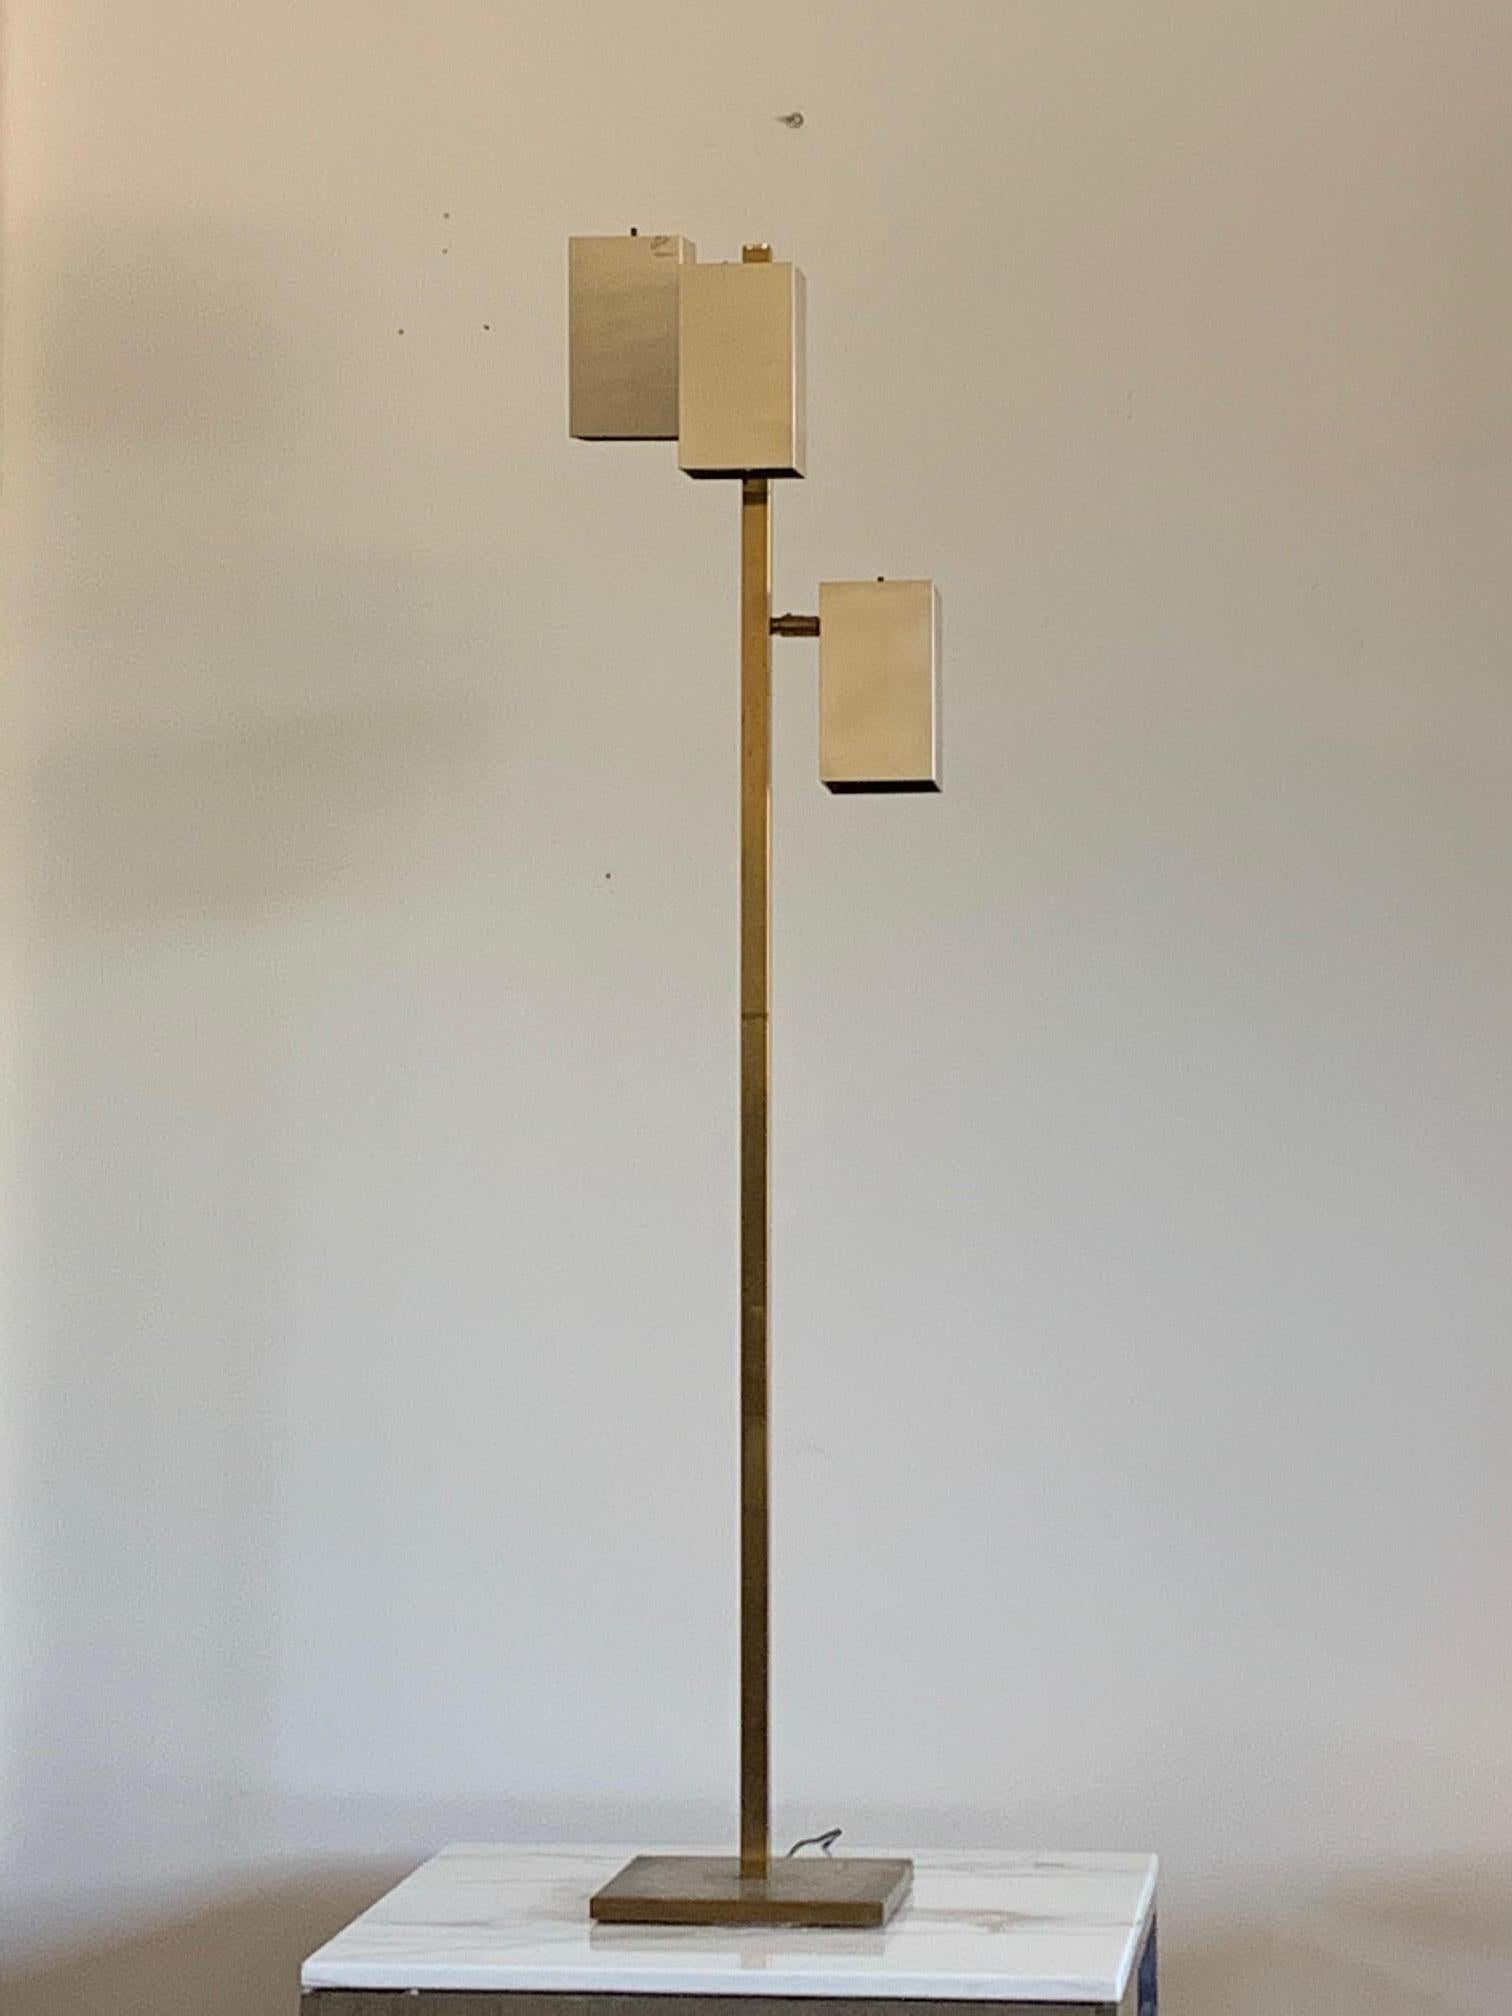 Brass floor lamp by Koch & Lowy with three articulating rectangular cubes mounted to the square brass vertical stem, on square brass base. Light cubes switch on and off independently and swivel and pivot multi directionally.